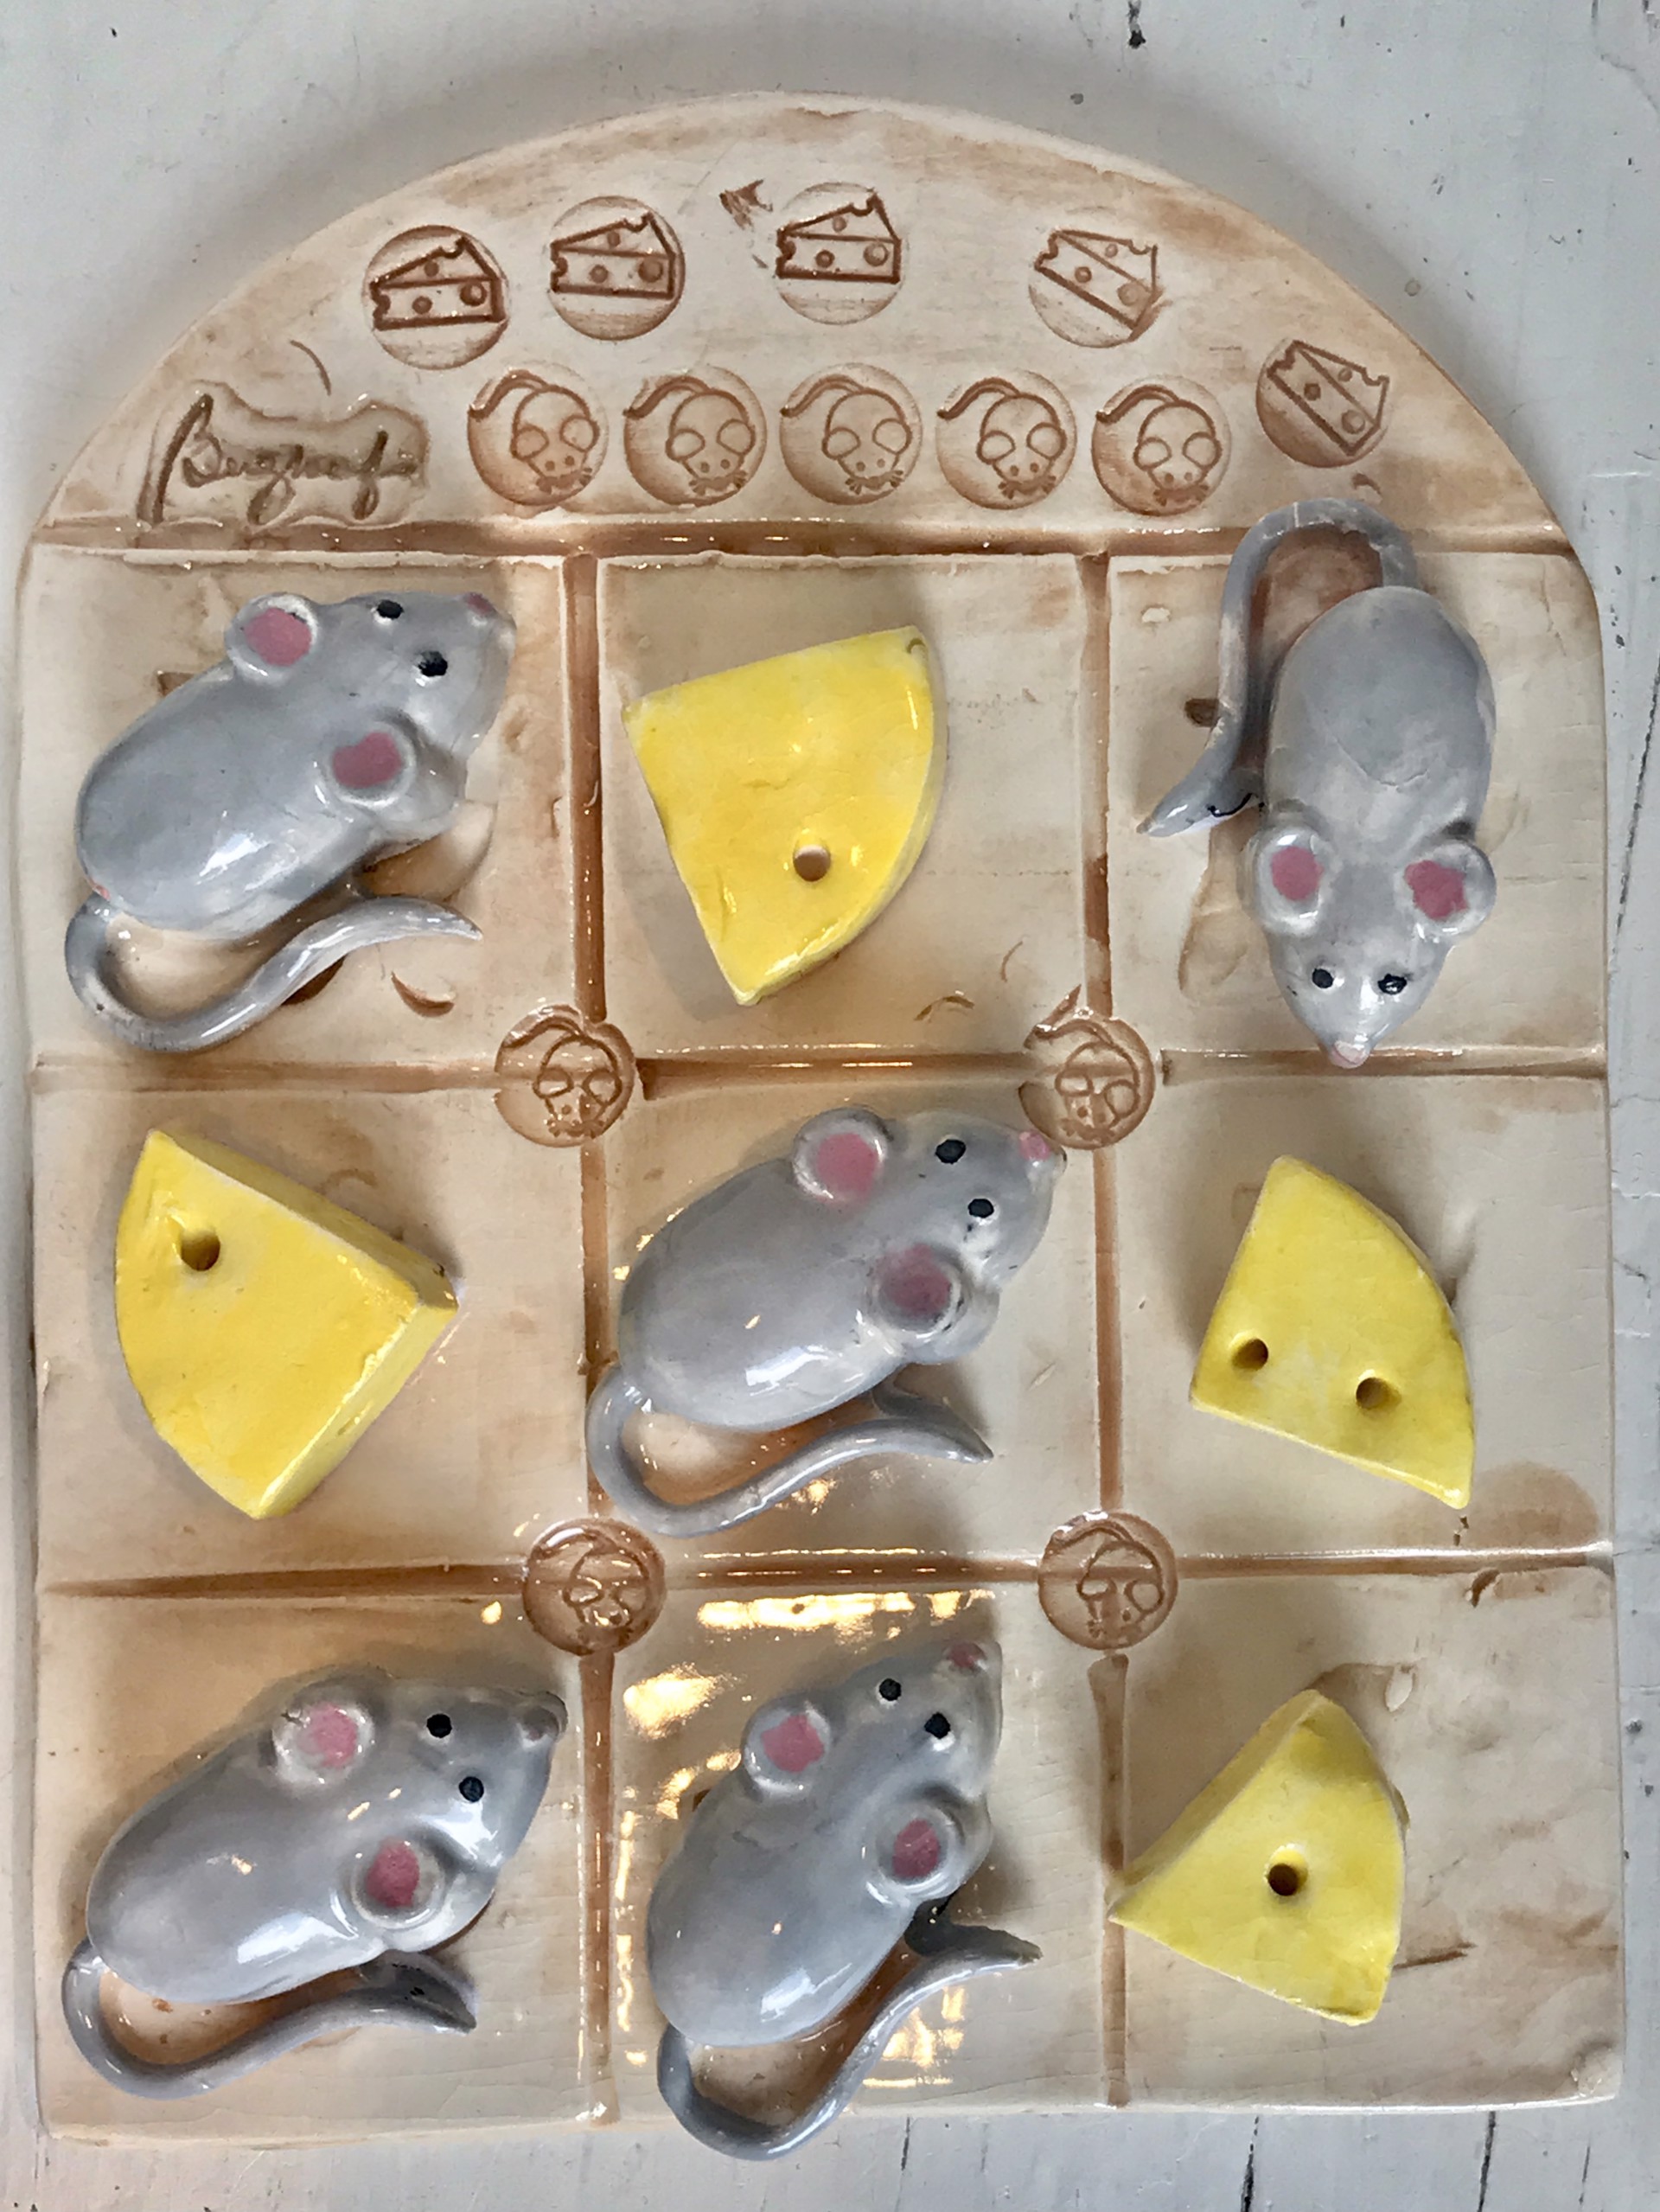 Tic Tac Mouse & Cheese by Barbara Bergwerf, Ceramics